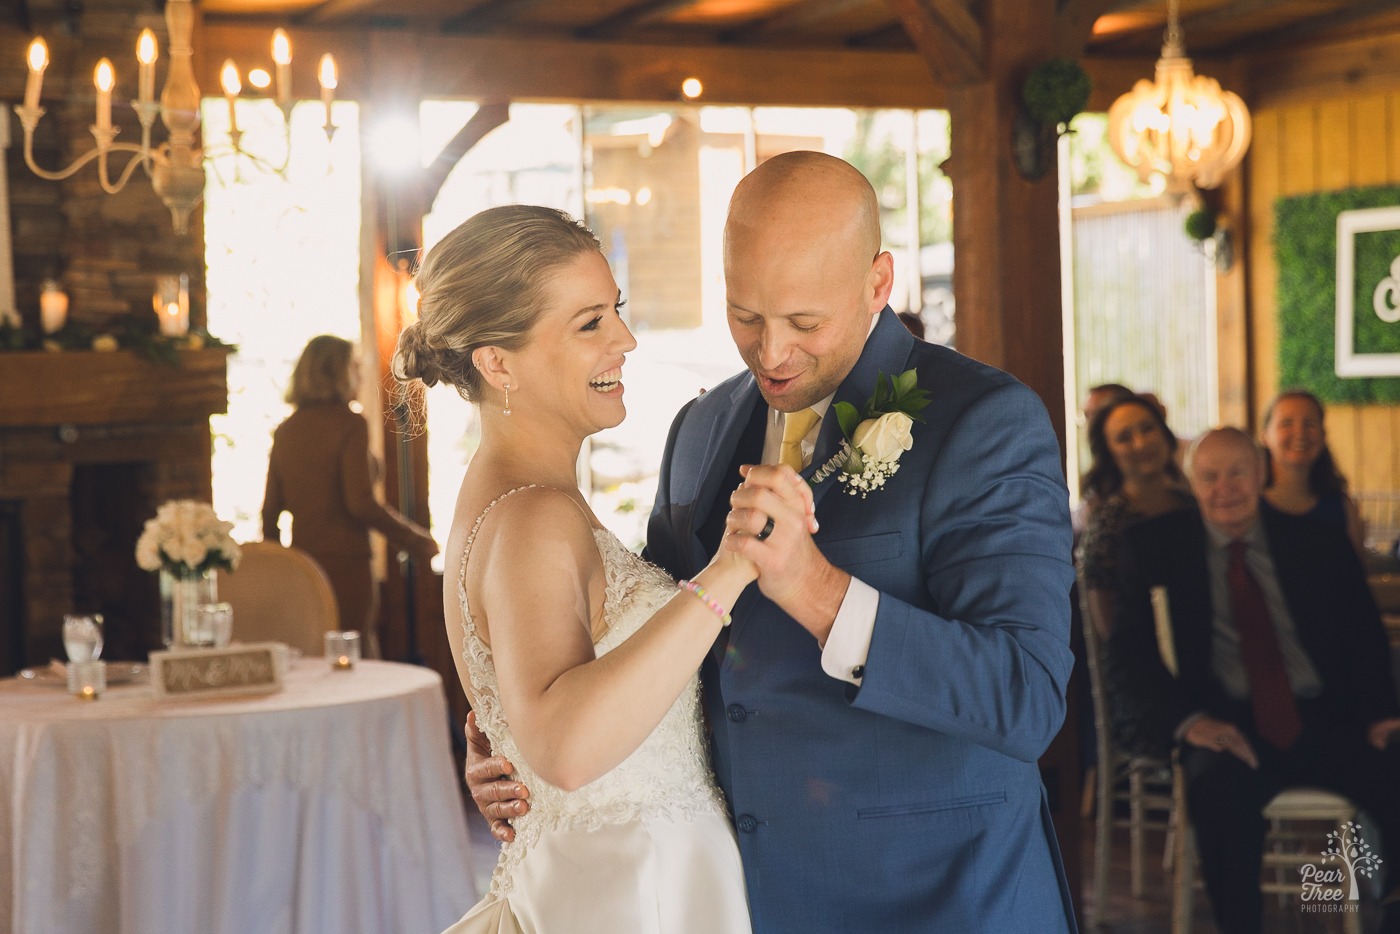 Bride laughing while her groom sings to her during their first dance